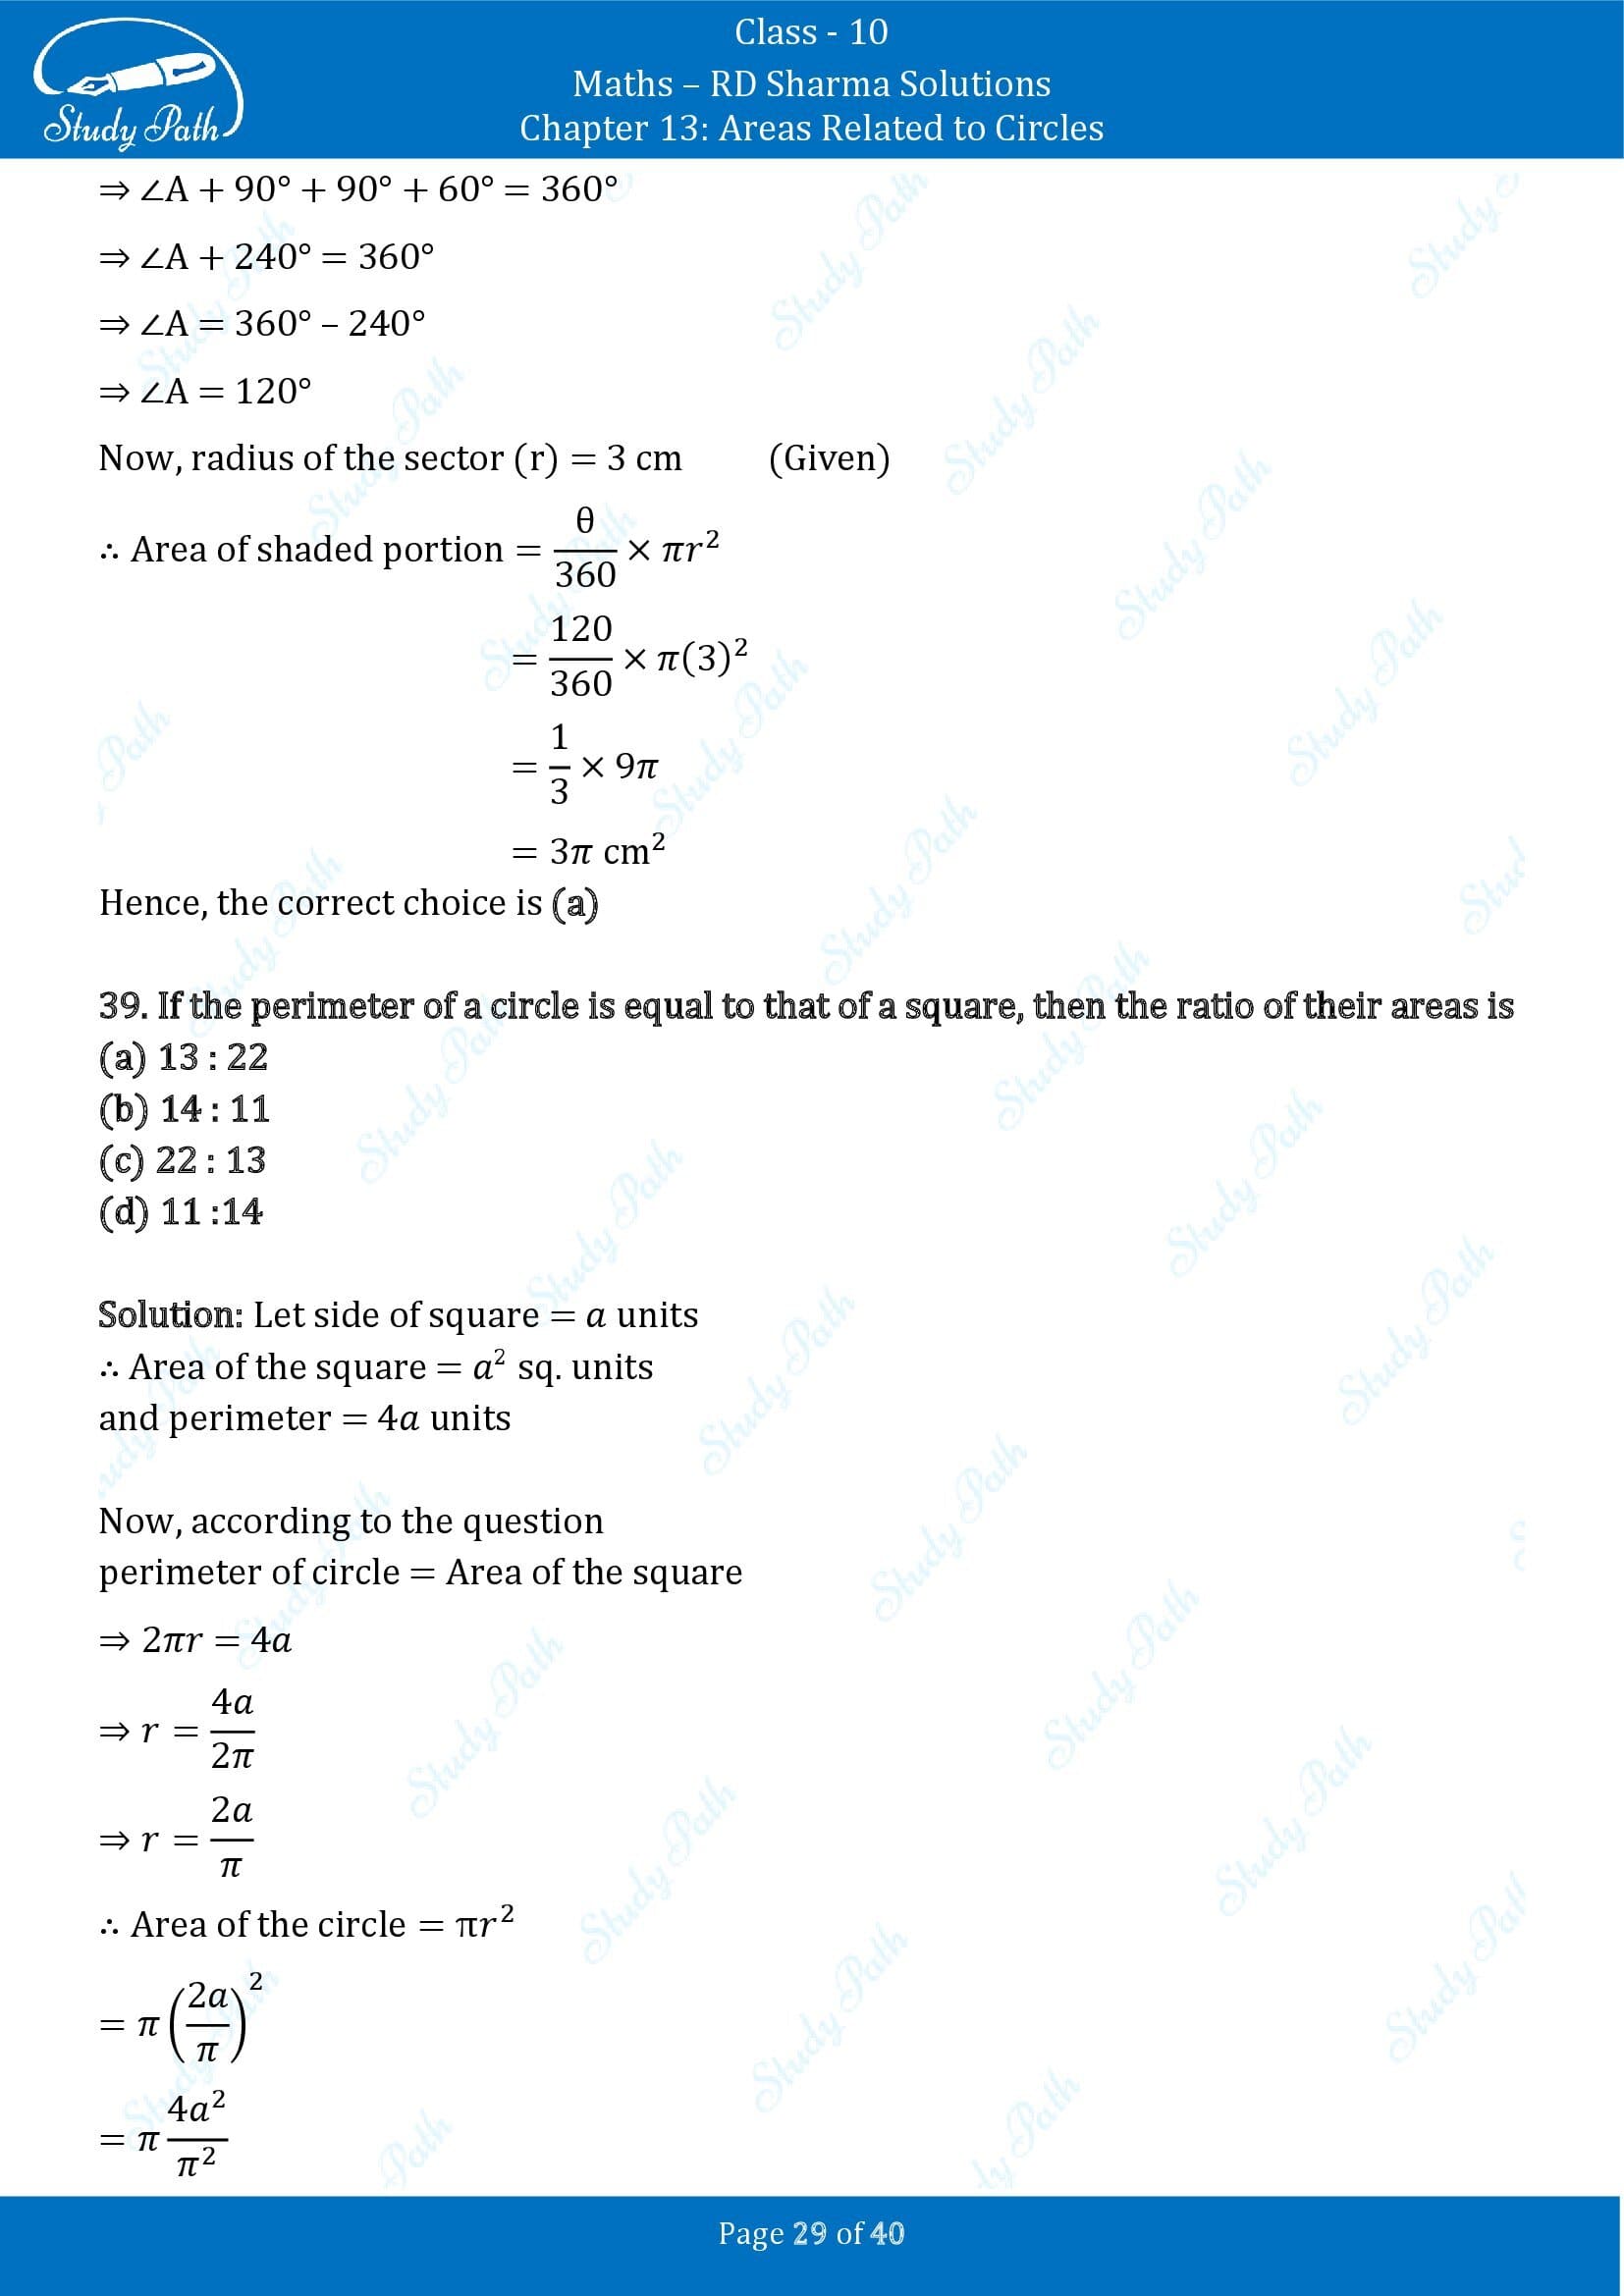 RD Sharma Solutions Class 10 Chapter 13 Areas Related to Circles Multiple Choice Question MCQs 00029